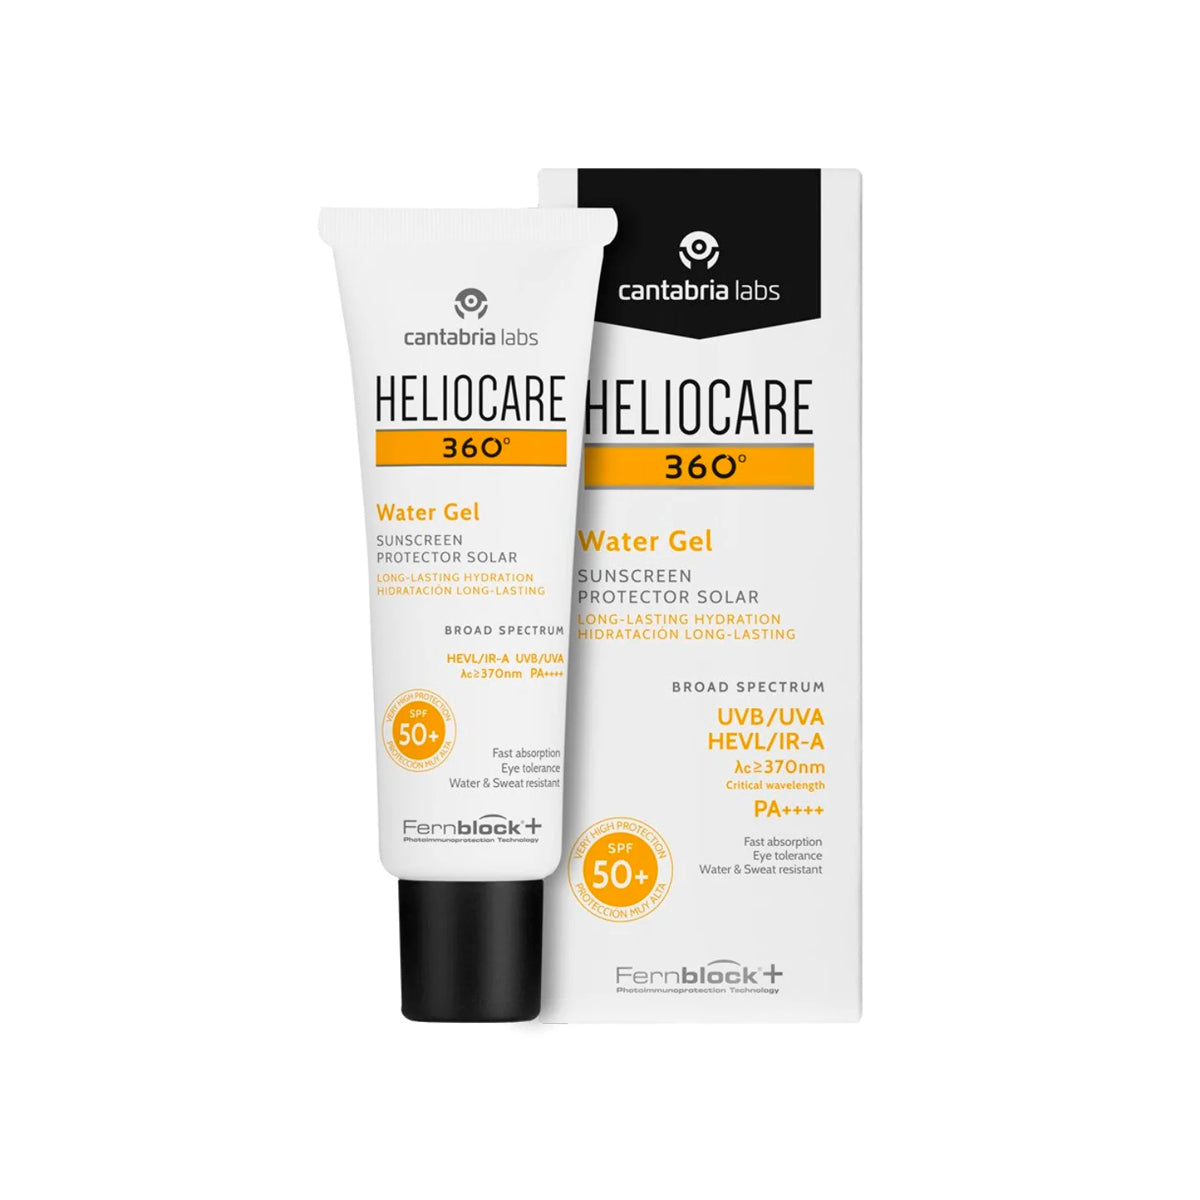 Heliocare 360 water gel 50ml Cantabria Labs